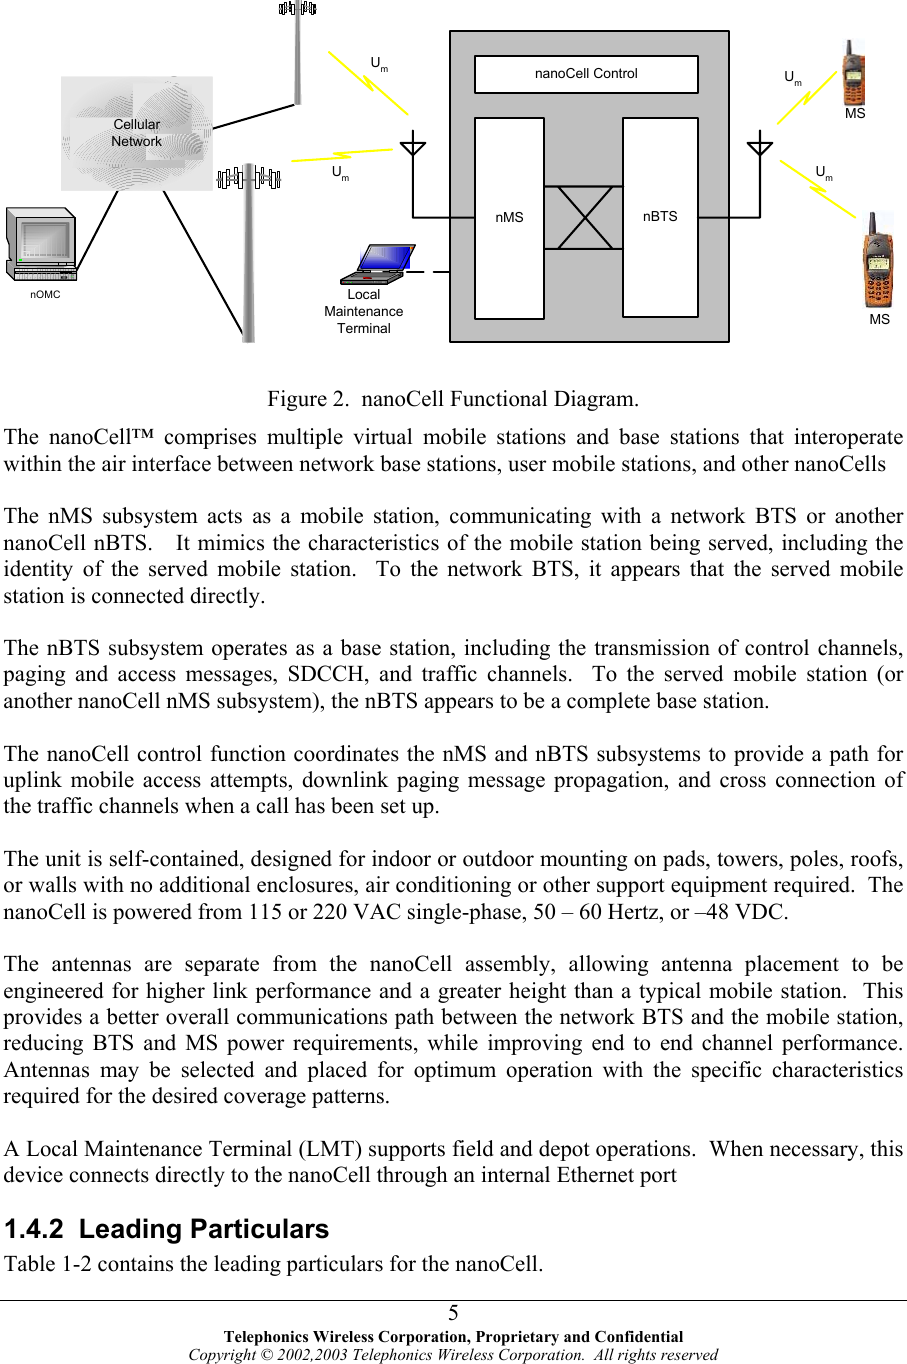     Figure 2.  nanoCell Functional Diagram. The nanoCell™ comprises multiple virtual mobile stations and base stations that interoperate within the air interface between network base stations, user mobile stations, and other nanoCells  MSnMS nBTSNetworkLocalMaintenanceTerminalnOMCUmUmMSnanoCell ControlUmUmCellularThe nMS subsystem acts as a mobile station, communicating with a network BTS or another anoCell nBTS.   It mimics the characteristics of the mobile station being served, including the identity of the served mobi ars that the served mobile station is connected directly. , aging and access messages, SDCCH, and traffic channels.  To the served mobile station (or s, downlink paging message propagation, and cross connection of e traffic channels when a call has been set up. equired.  The anoCell is powered from 115 or 220 VAC single-phase, 50 – 60 Hertz, or –48 VDC. eater height than a typical mobile station.  This rovides a better overall communications path between the network BTS and the mobile station, r the nanoCell. nle station.  To the network BTS, it appe The nBTS subsystem operates as a base station, including the transmission of control channelspanother nanoCell nMS subsystem), the nBTS appears to be a complete base station.  The nanoCell control function coordinates the nMS and nBTS subsystems to provide a path for uplink mobile access attemptth The unit is self-contained, designed for indoor or outdoor mounting on pads, towers, poles, roofs, or walls with no additional enclosures, air conditioning or other support equipment rn The antennas are separate from the nanoCell assembly, allowing antenna placement to be engineered for higher link performance and a grpreducing BTS and MS power requirements, while improving end to end channel performance.  Antennas may be selected and placed for optimum operation with the specific characteristics required for the desired coverage patterns.  A Local Maintenance Terminal (LMT) supports field and depot operations.  When necessary, this device connects directly to the nanoCell through an internal Ethernet port 1.4.2 Leading Particulars Table 1-2 contains the leading particulars fo Telephonics Wireless Corporation, Proprietary and Confidential Copyright © 2002,2003 Telephonics Wireless Corporation.  All rights reserved 5